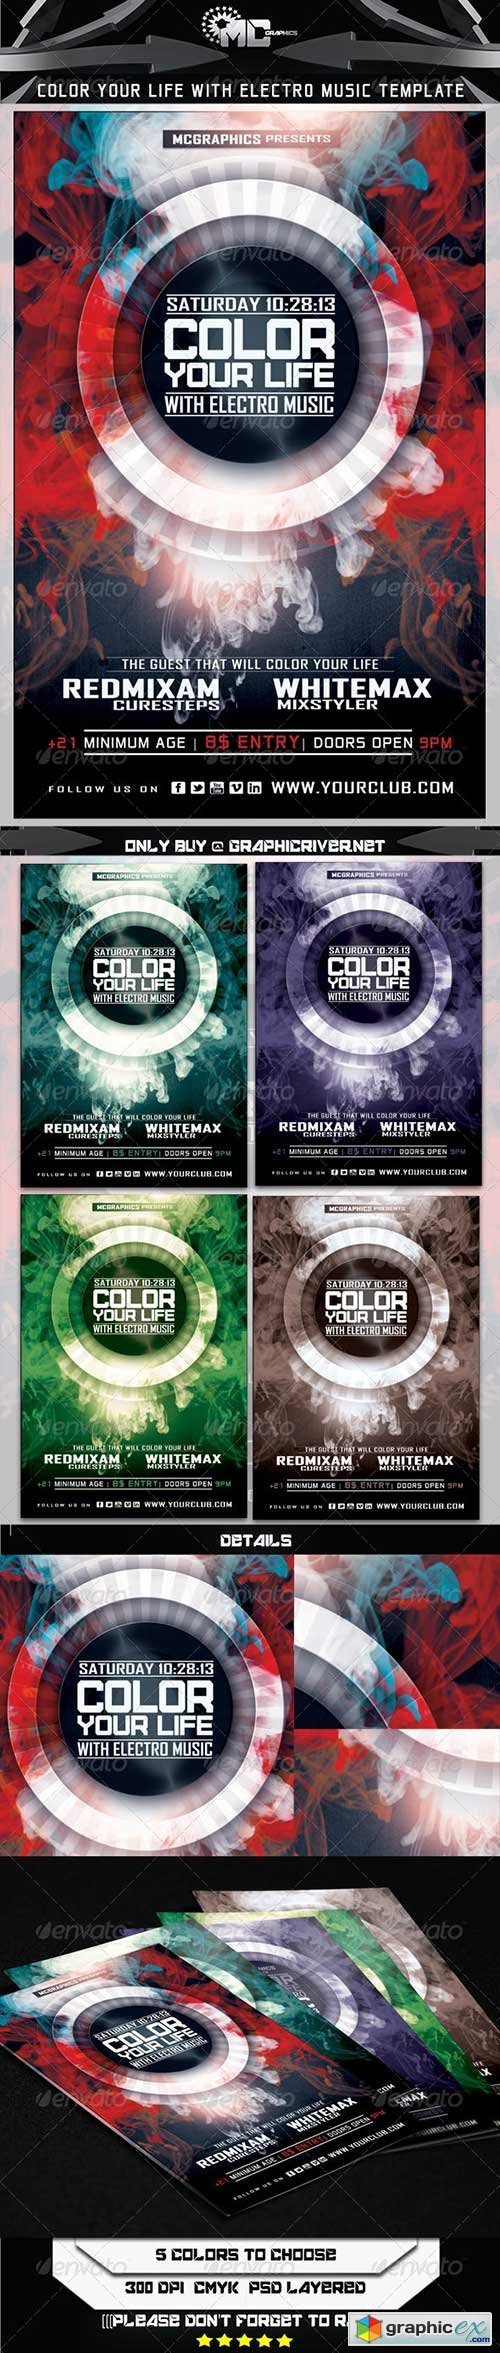 Color Your Life With Electro Music Flyer Template